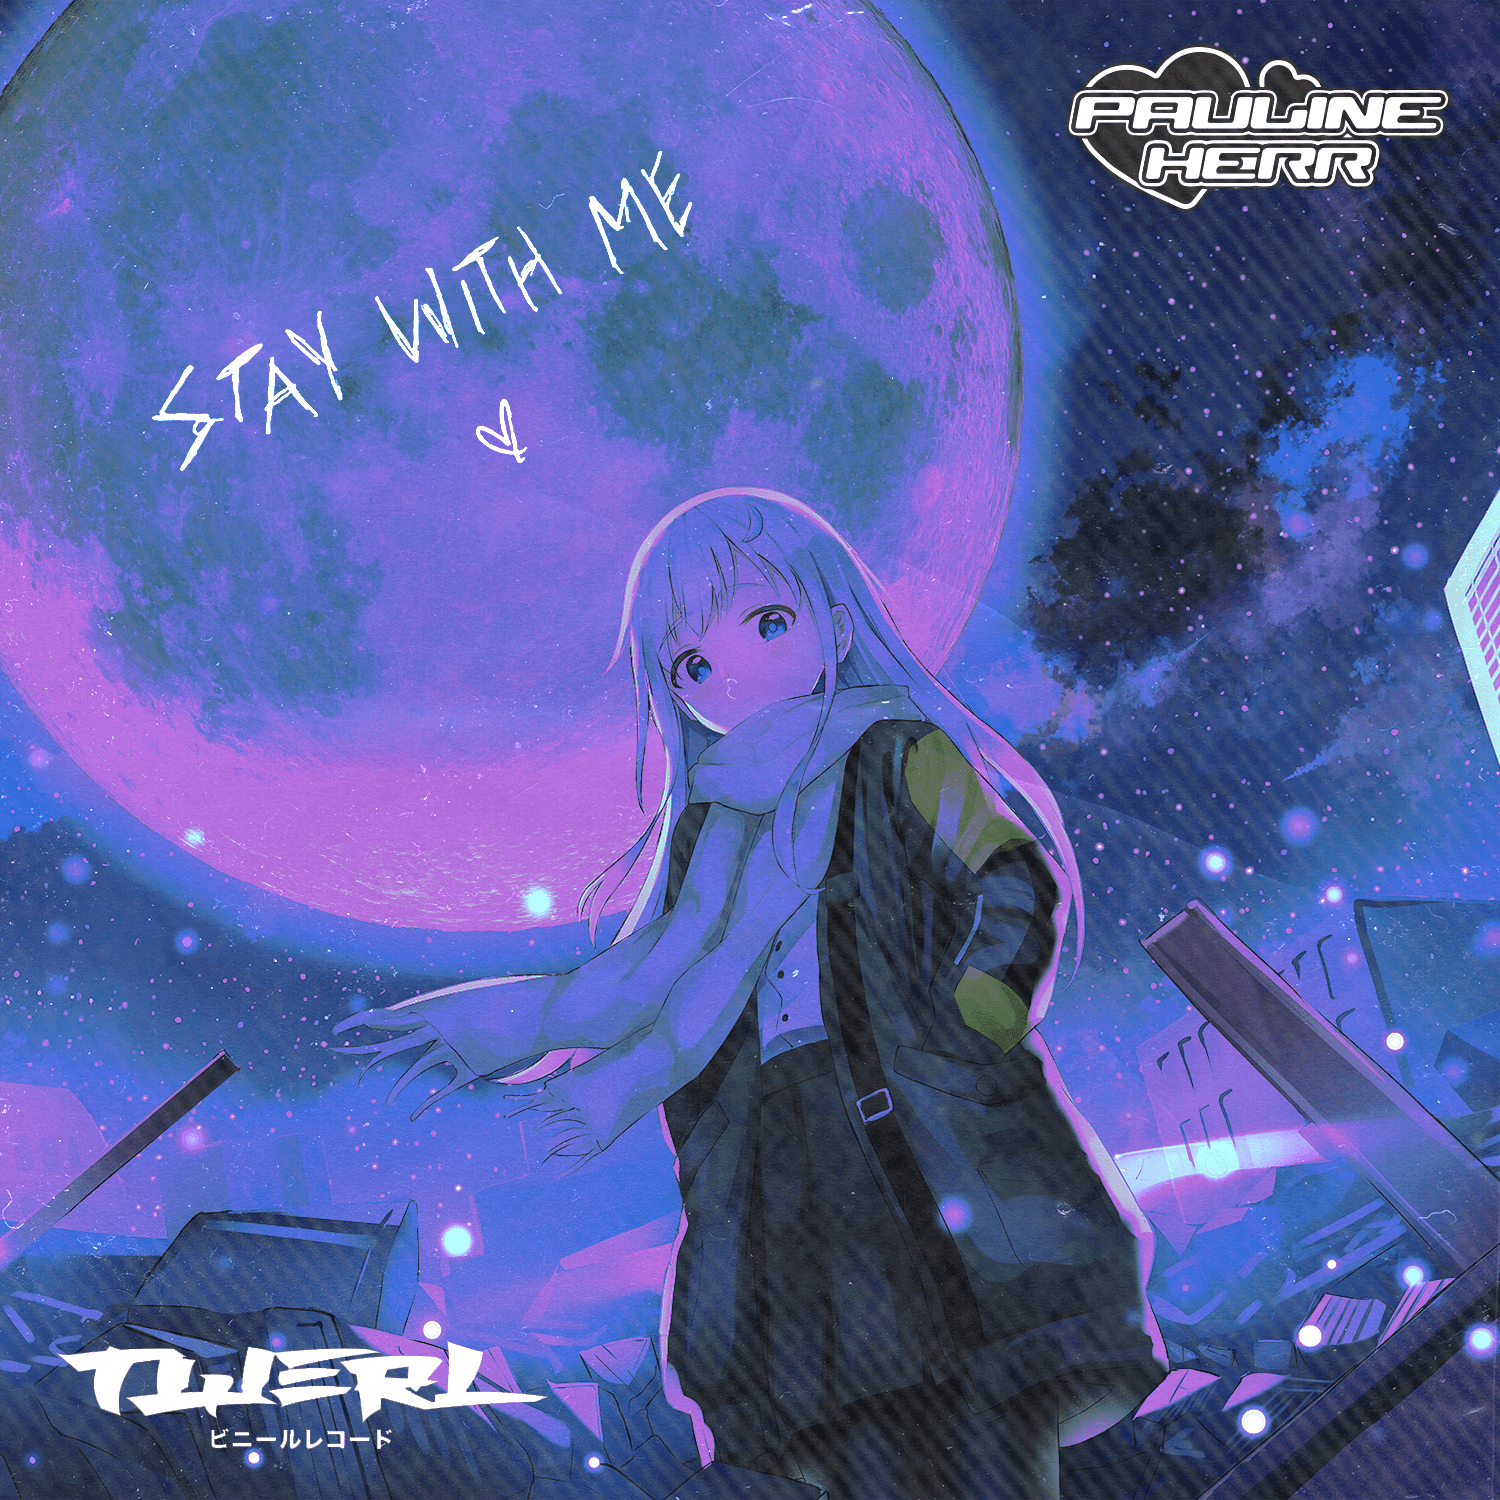 Cover art for Pauline Herr & TWERL - Stay With Me by Pauline Herr ｡･:*:･ﾟ☆